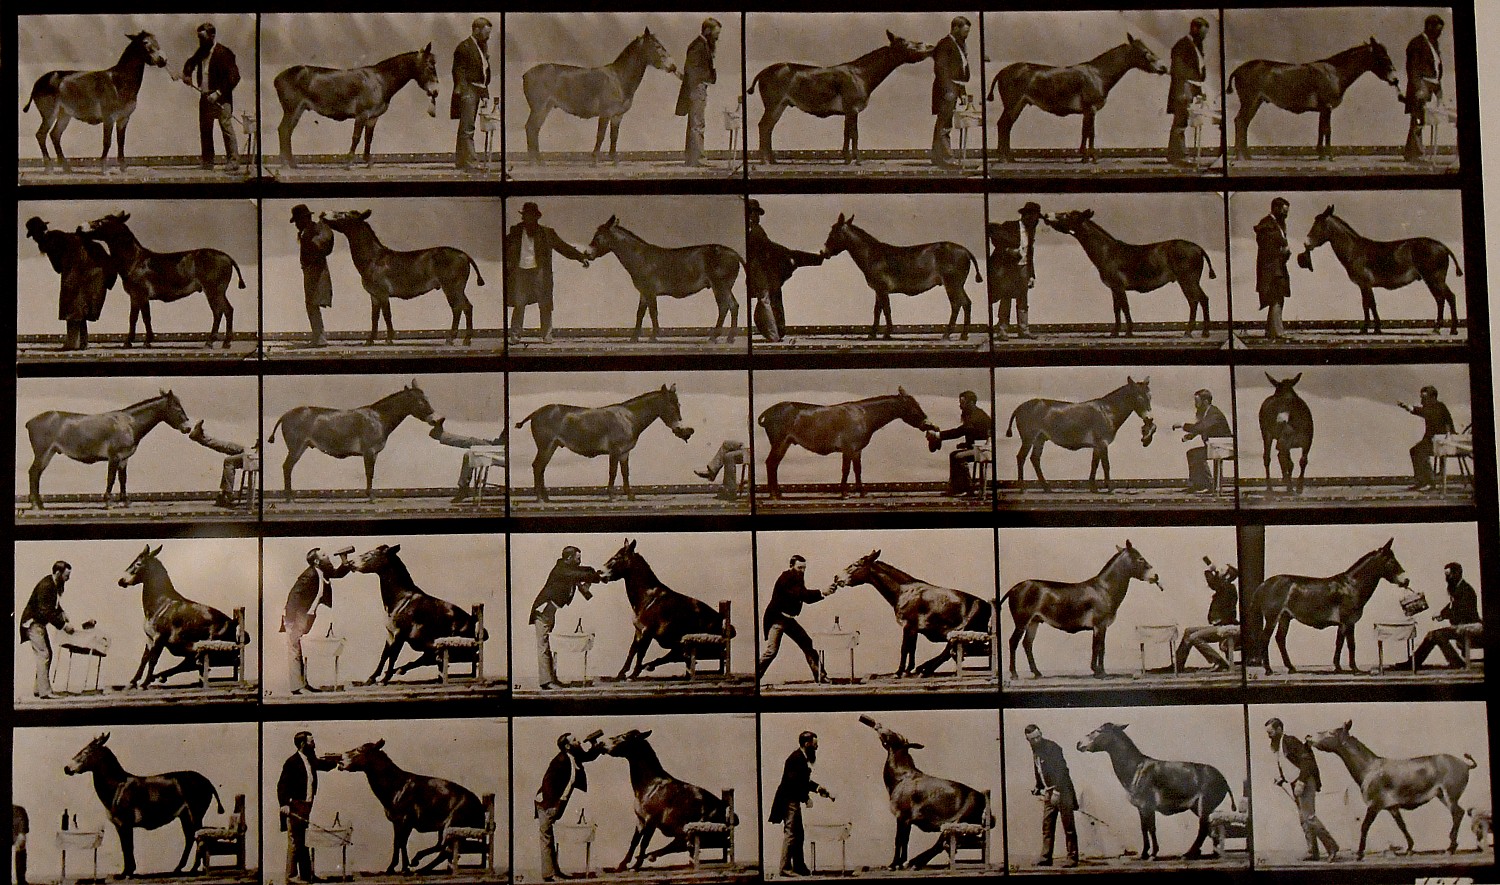 Eadweard Muybridge’s breakthrough photo, “The Horse in Motion,” from 1878 is on view at the Nassau County Museum of Art © 2016 Karen Rubin/goingplacesfarandnear.com